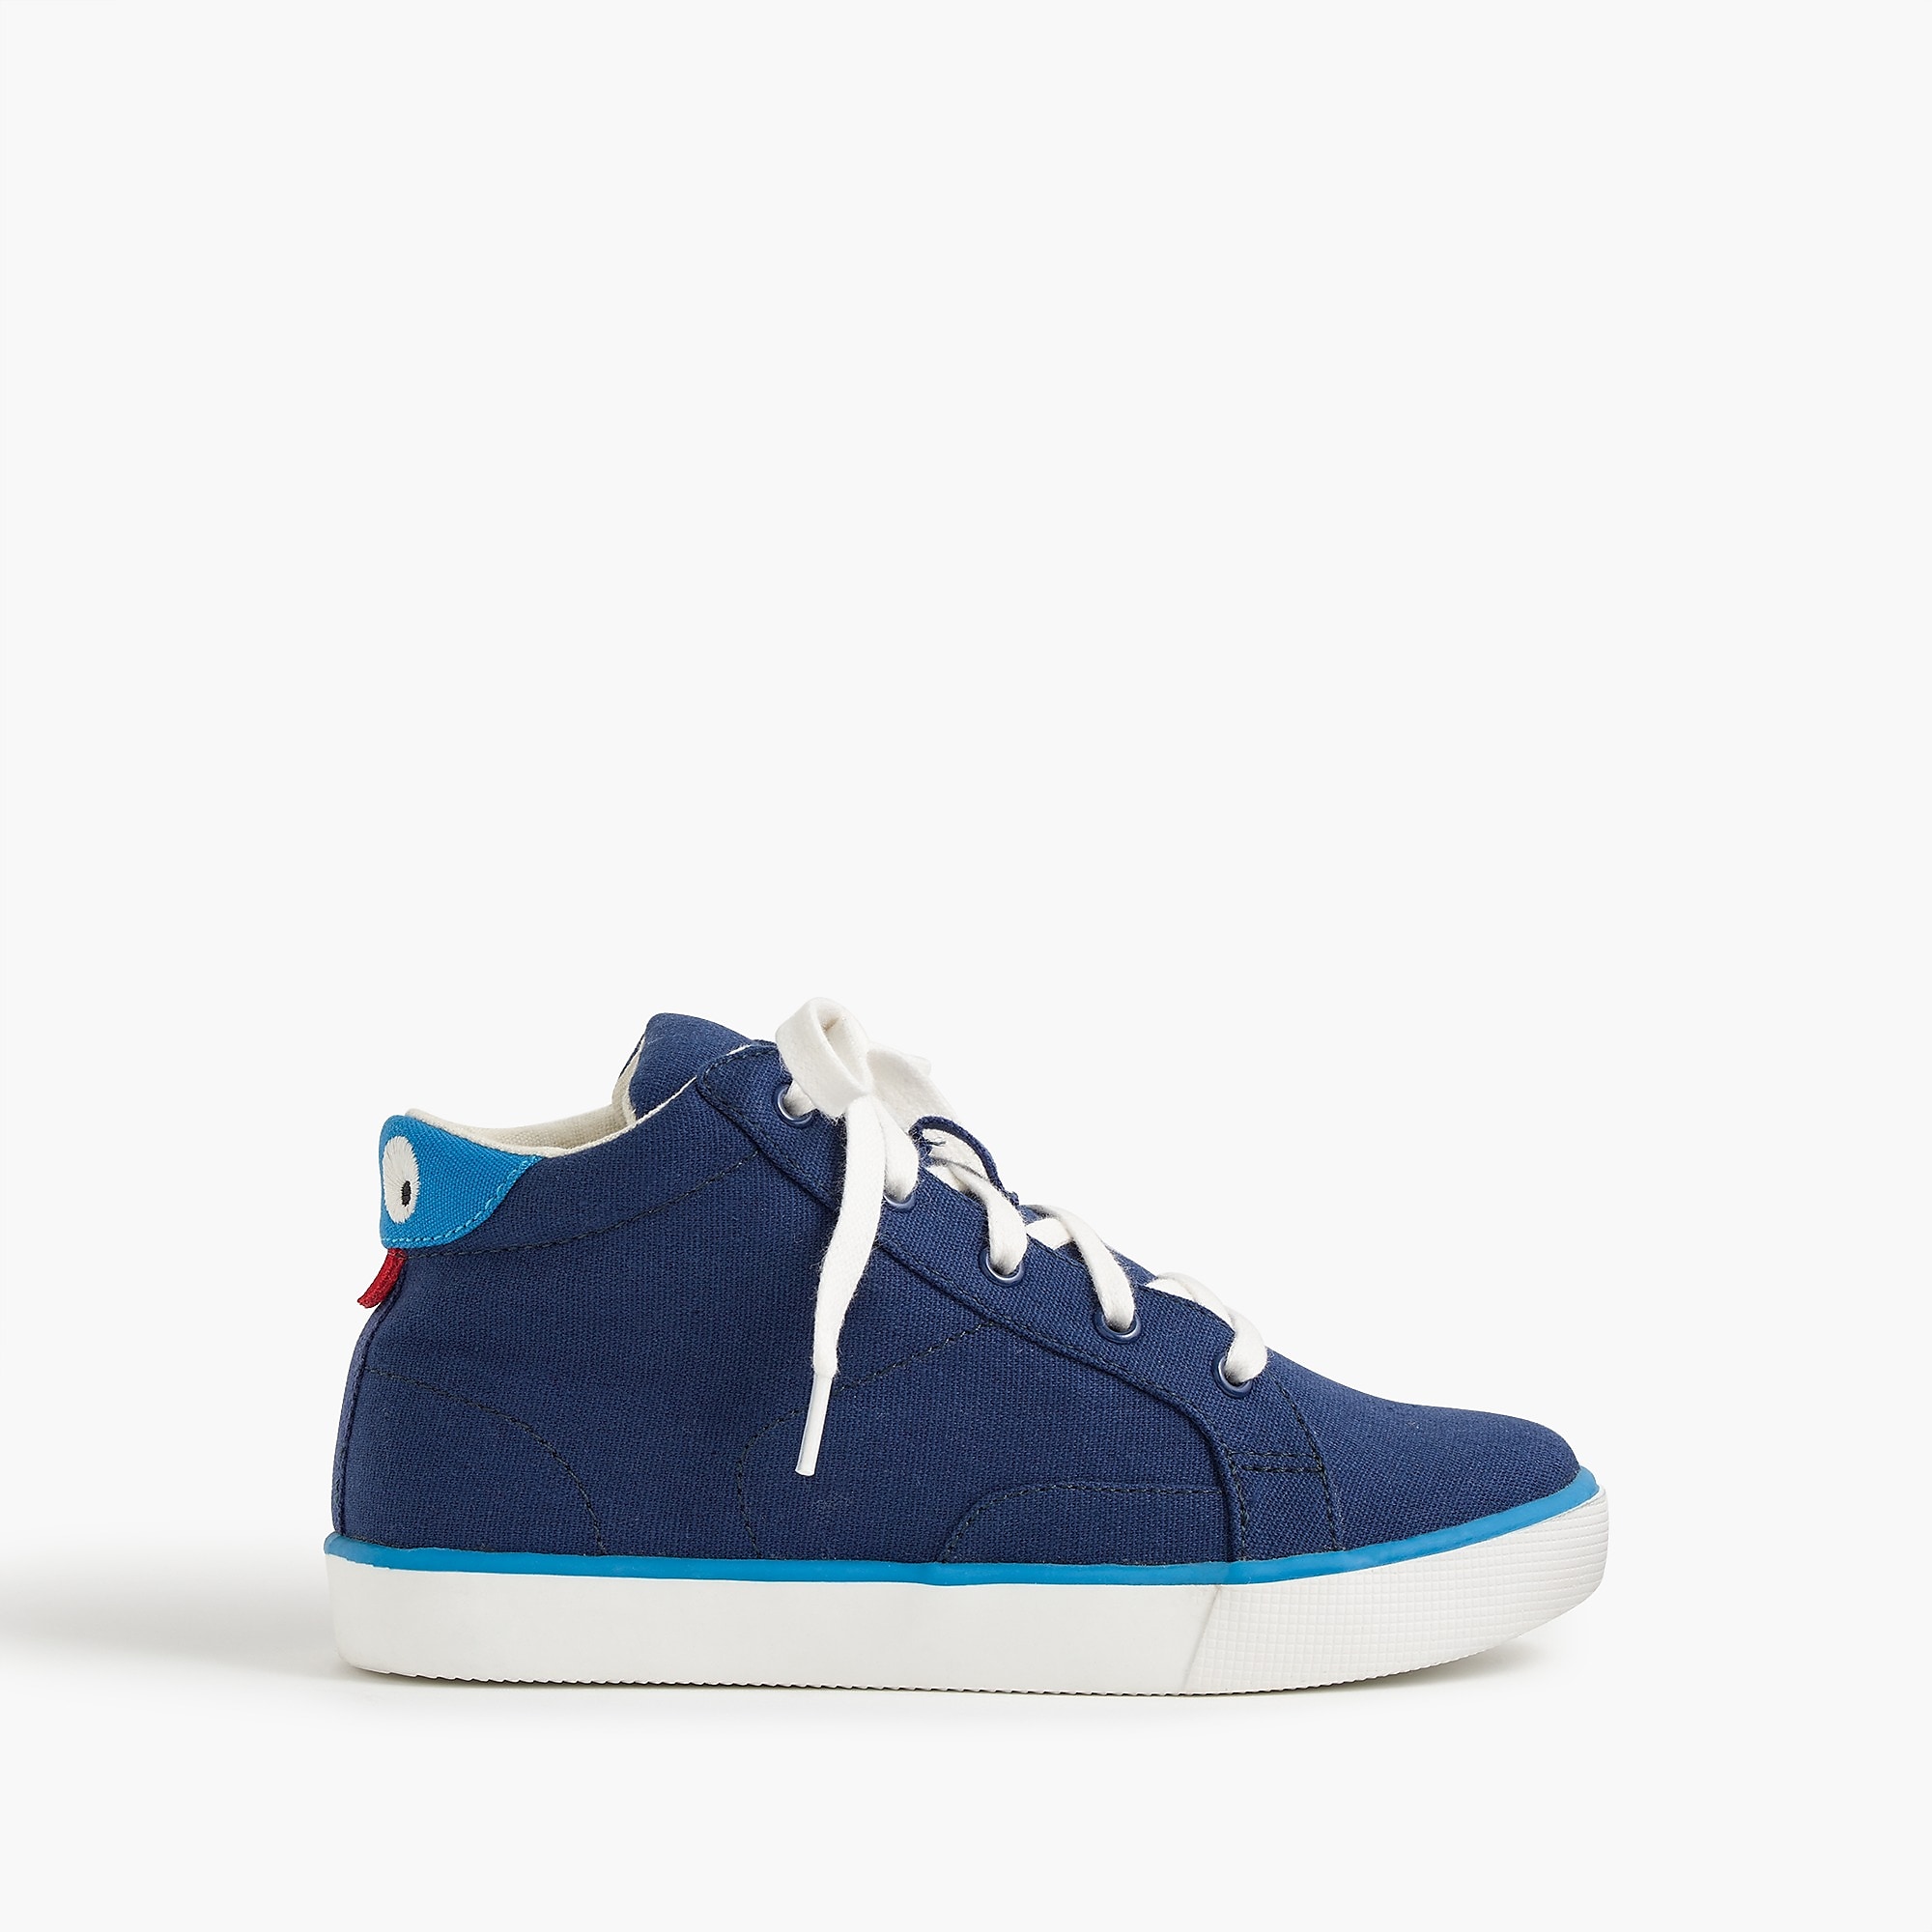 Kids' Max the Monster lace-up high top sneakers : Boy sneakers | J.Crew